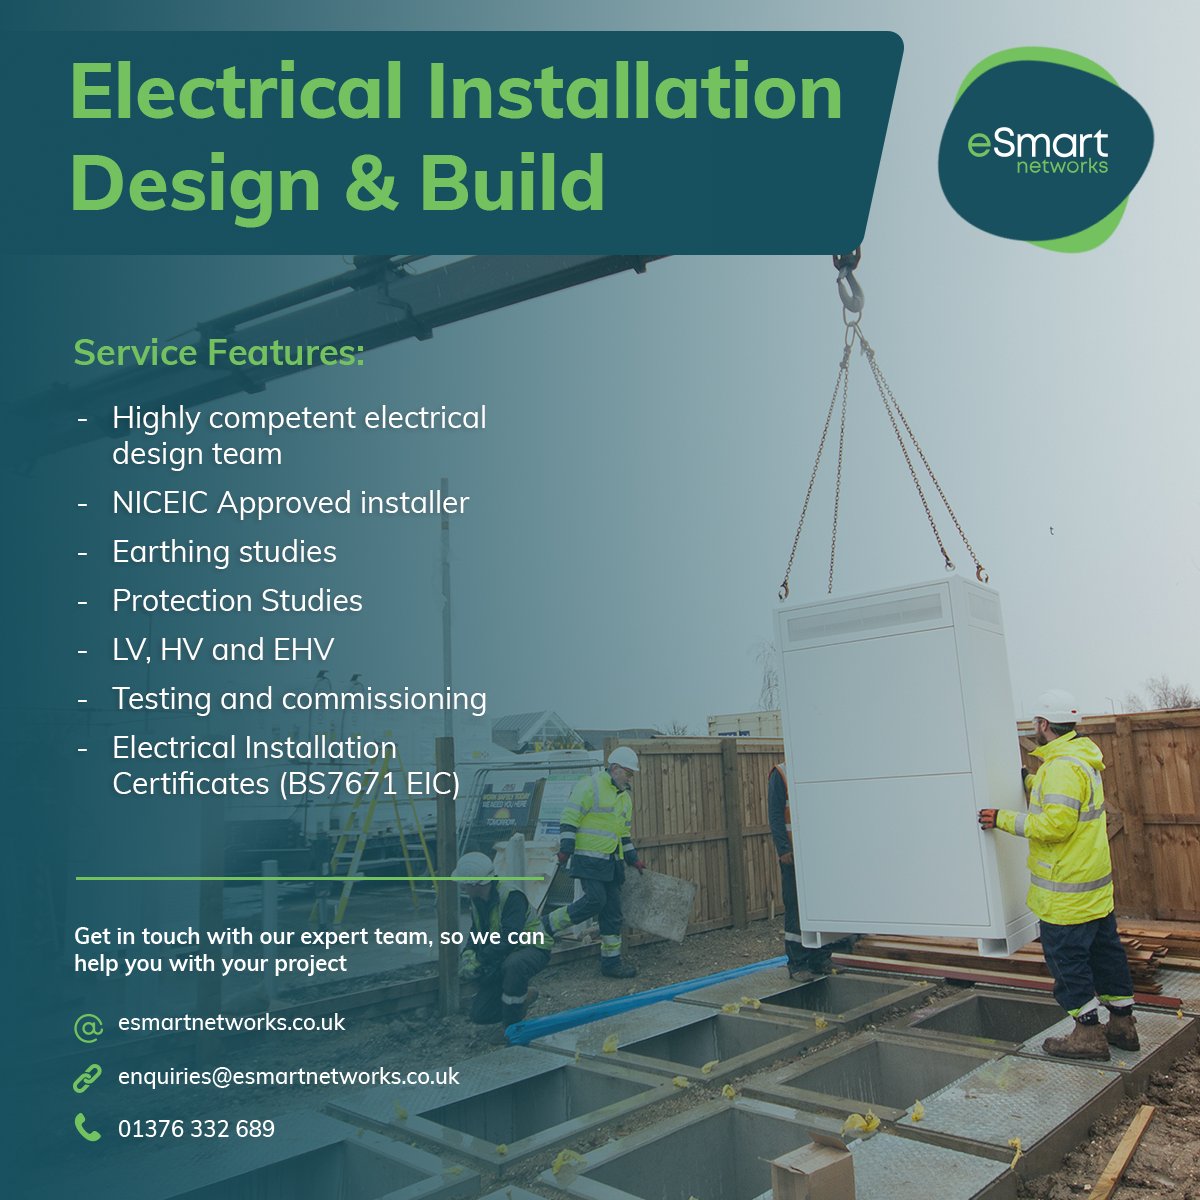 Electrical Installation Design & Build⚡

Our in-house electrical designers and electricians complete all electrical installations to BS7671. Working per other required regulations, such as the EV Code of Practice, PV Code of Practice and APEA Blue Book.

ow.ly/2zlR50NGQx8